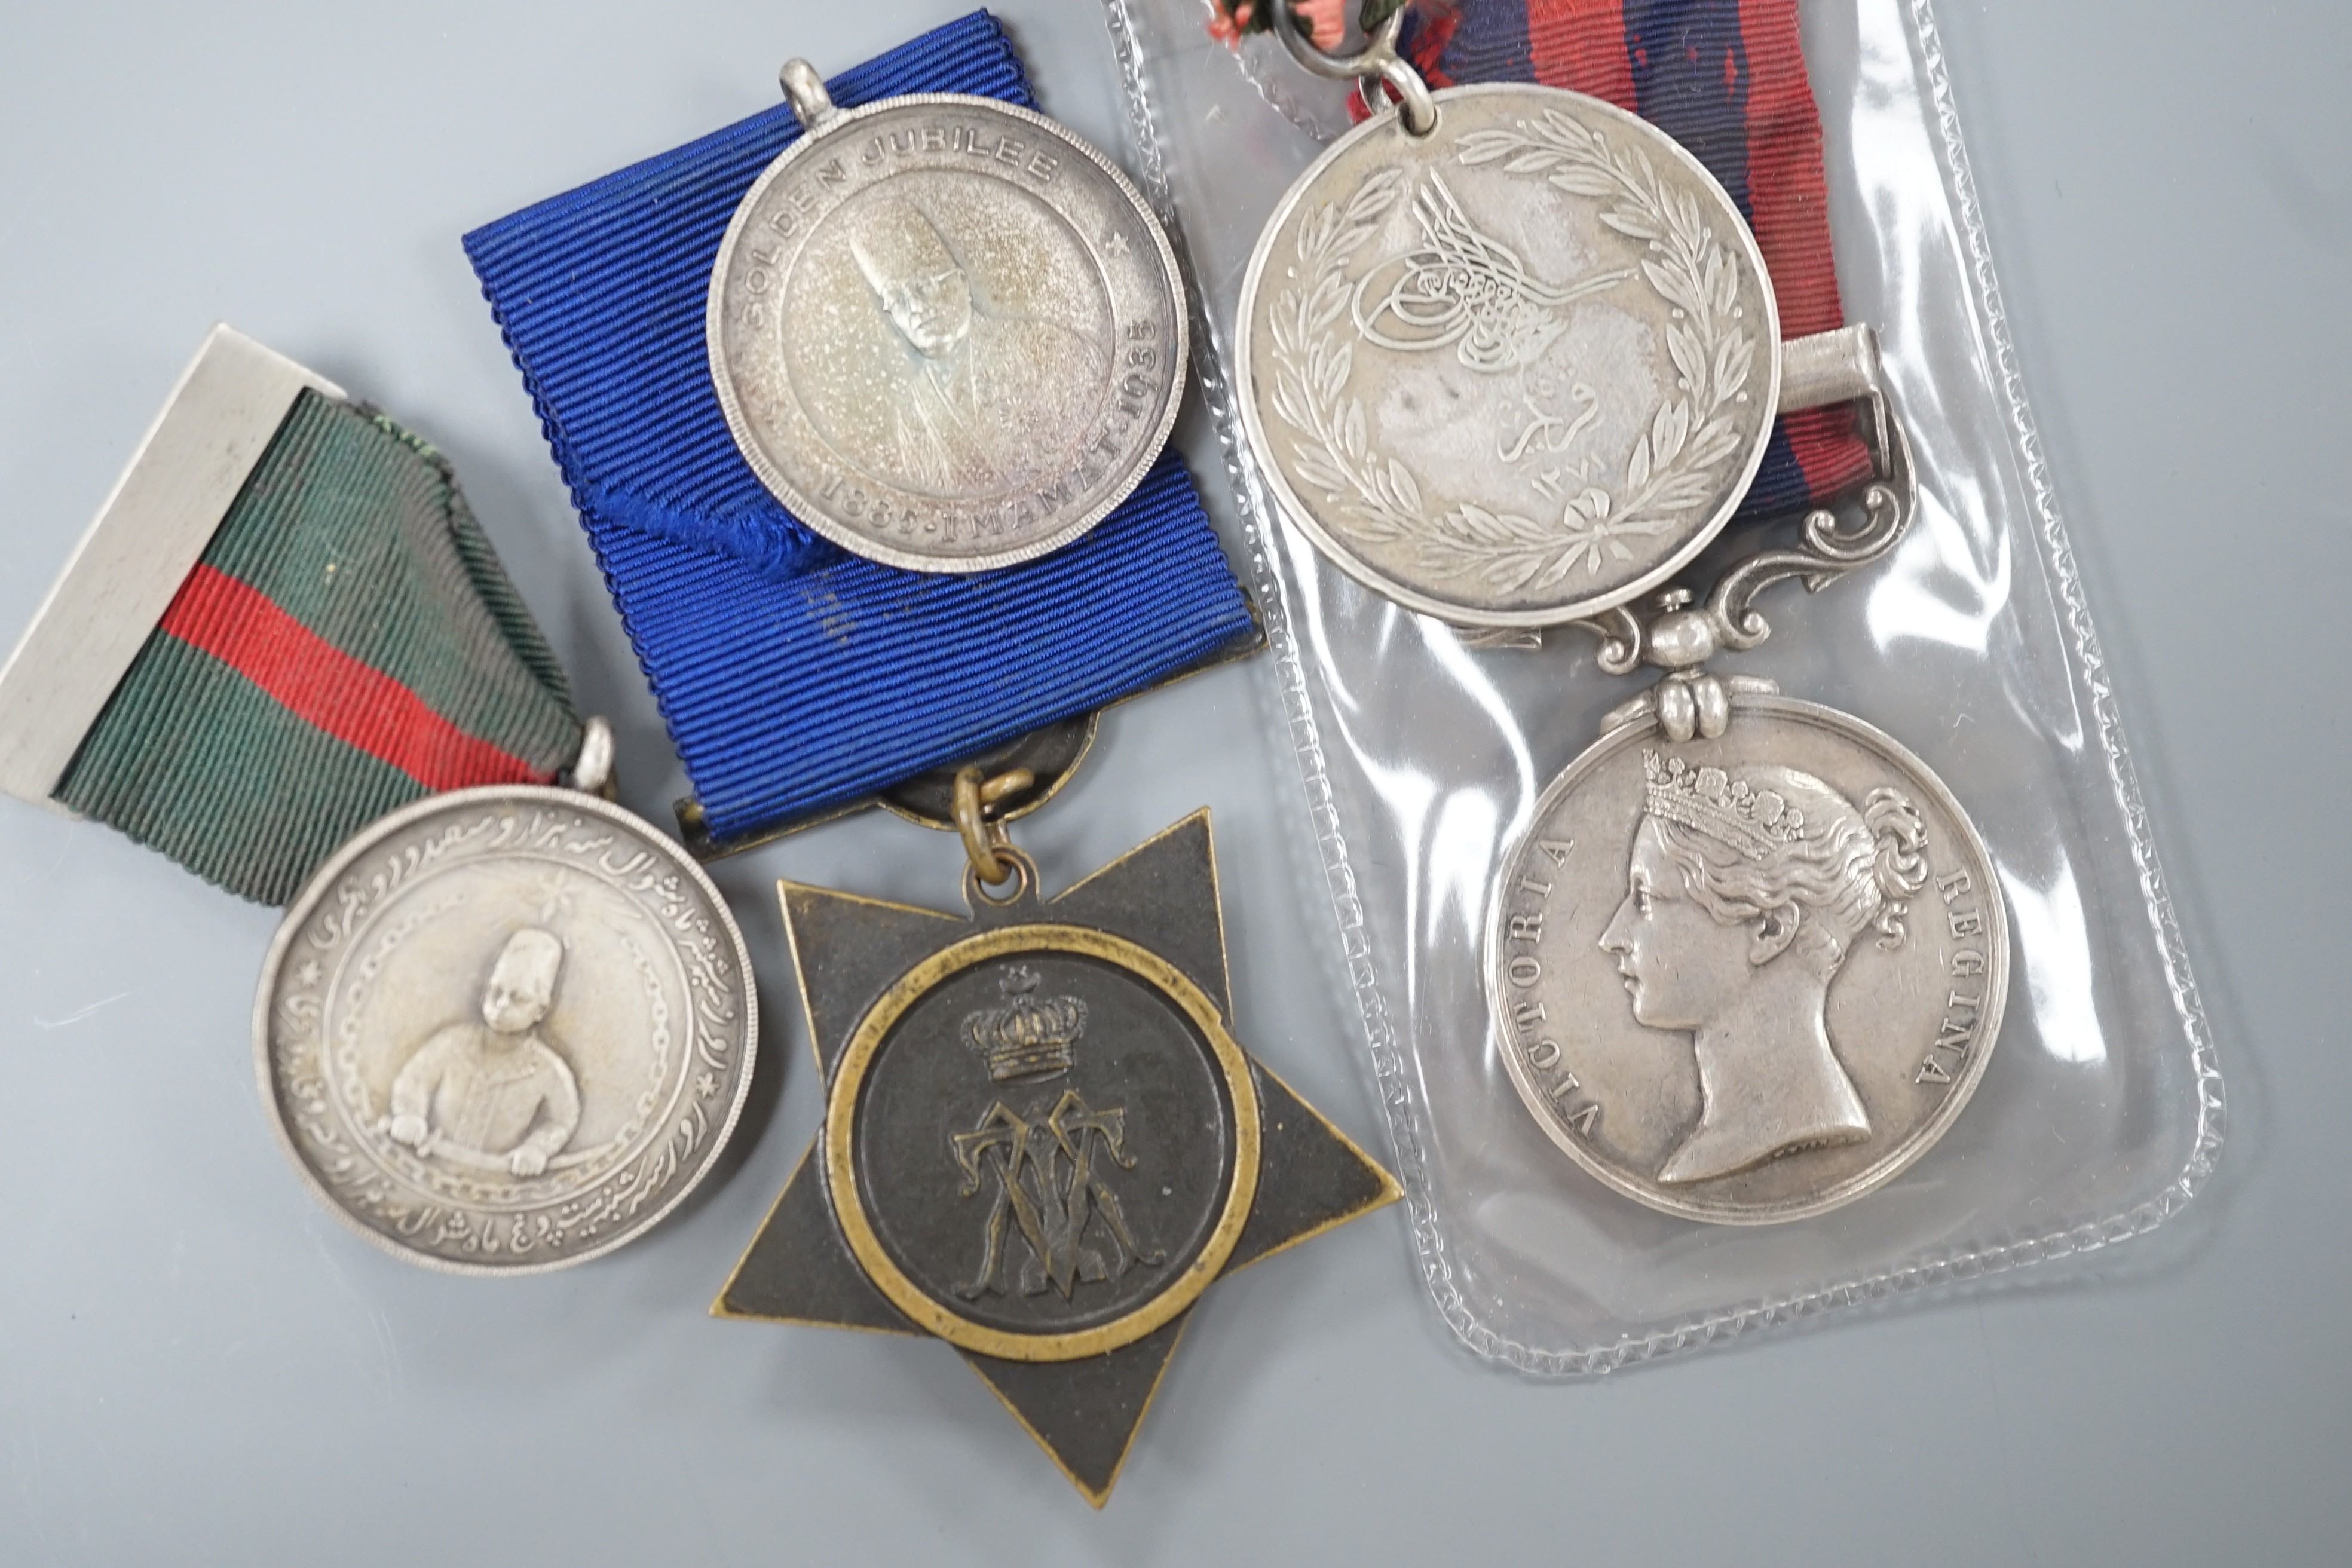 An India GSM with Burma 1885-7 clasp to 1167 Clr. Sergt. Doidge (or Dadge) 2d. Bn. L’pool R. together with a Turkish medal for the Crimean war and a Khedive’s bronze star (1882)